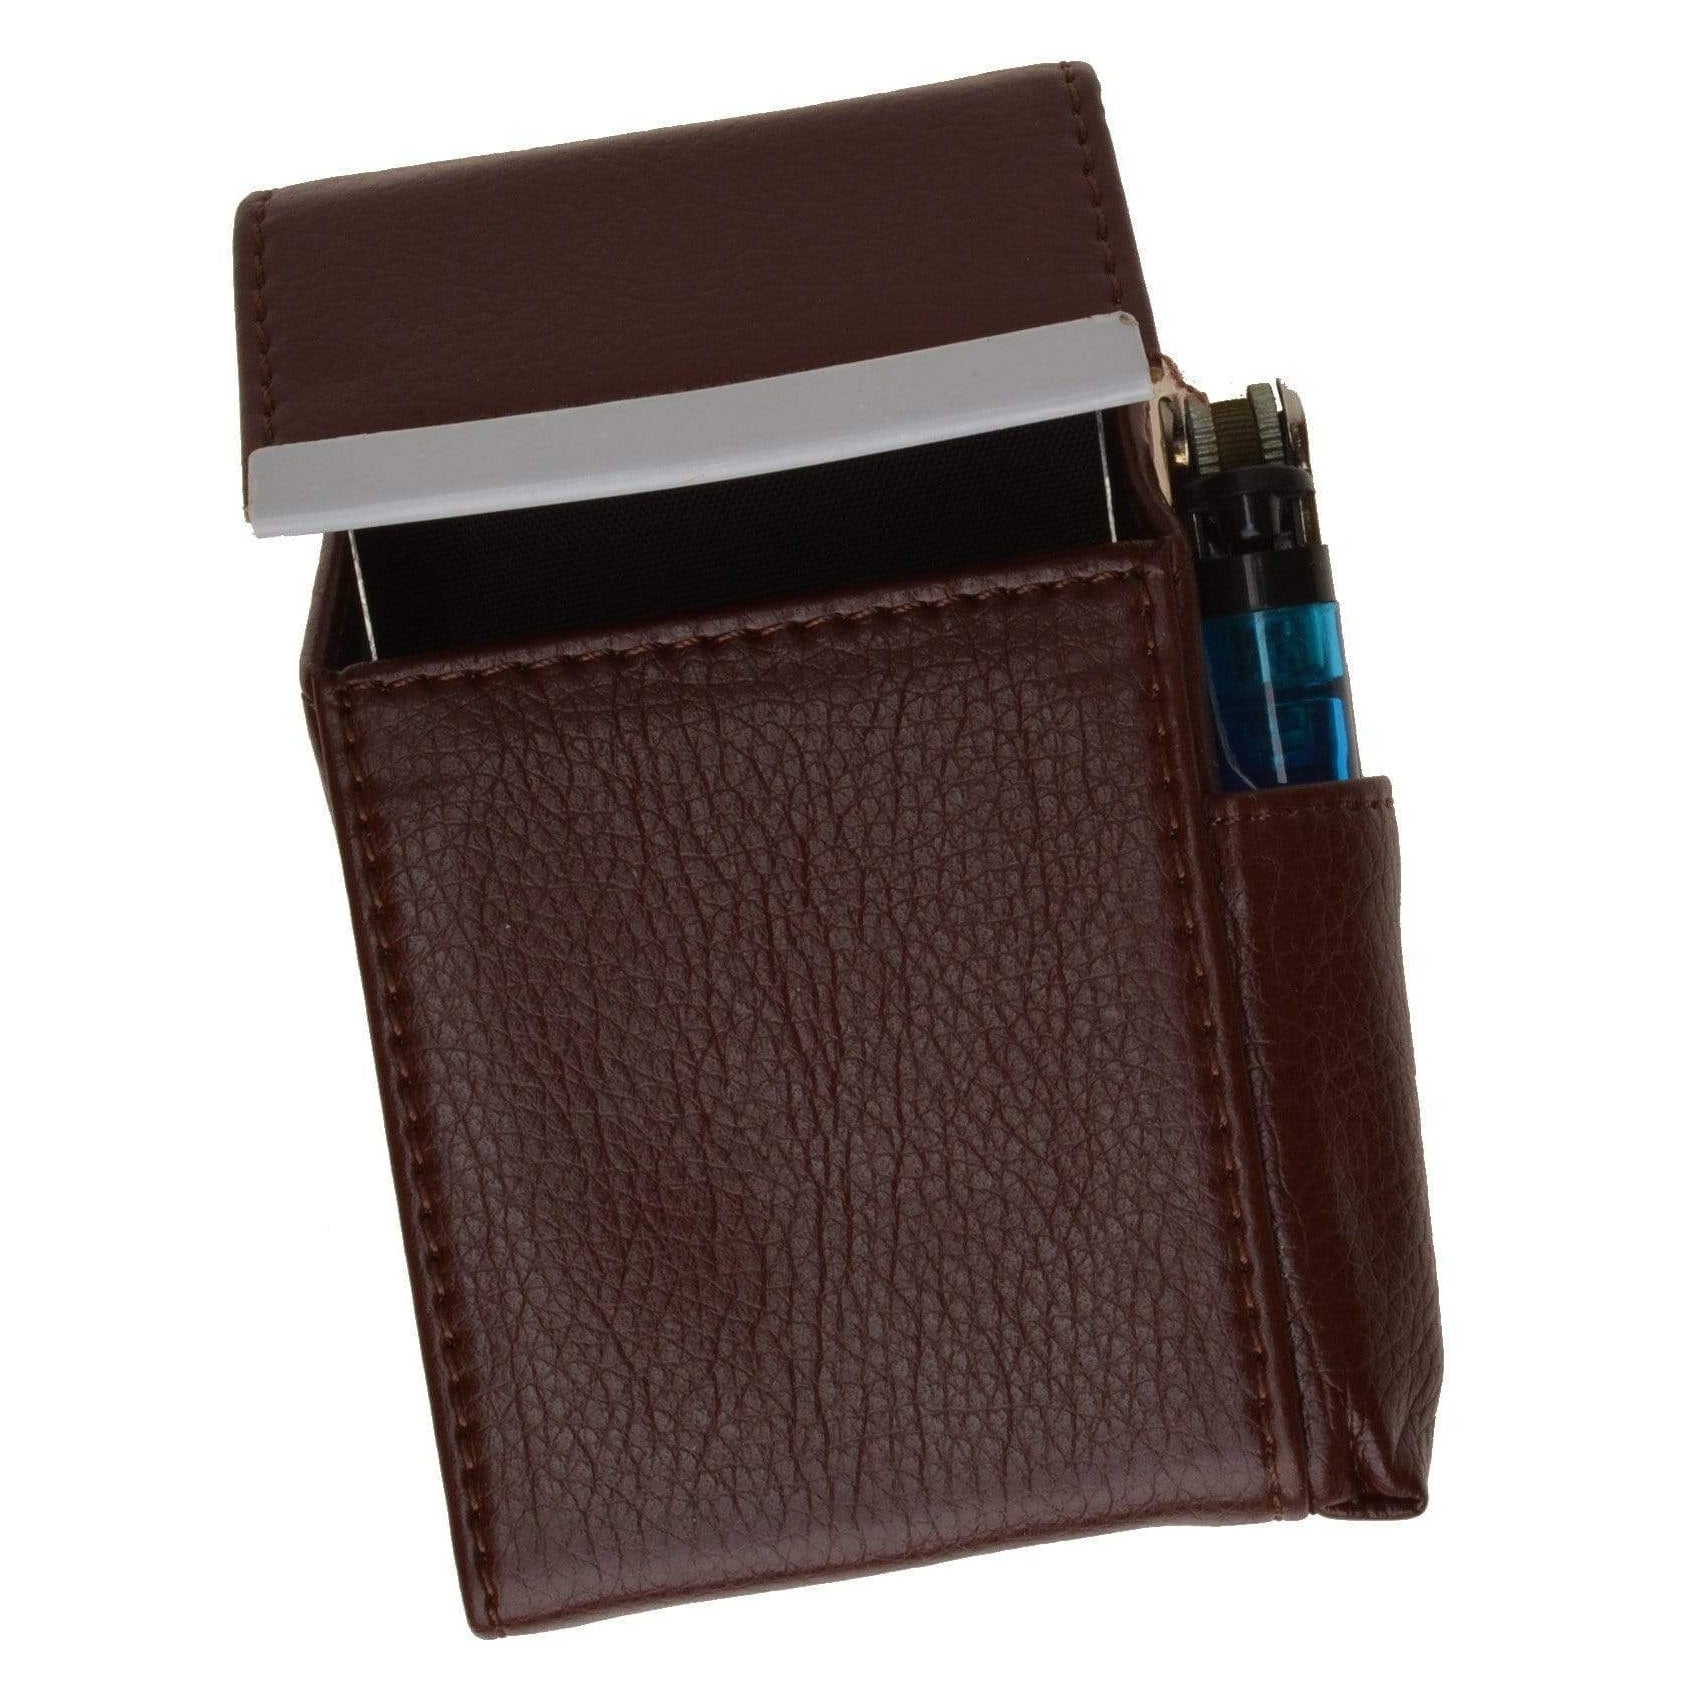 Brown Bear Wallets : Buy Brown Bear Classic Men's Wallet with I.D and Coin  Pocket & RFID in Genuine Leather Black Online